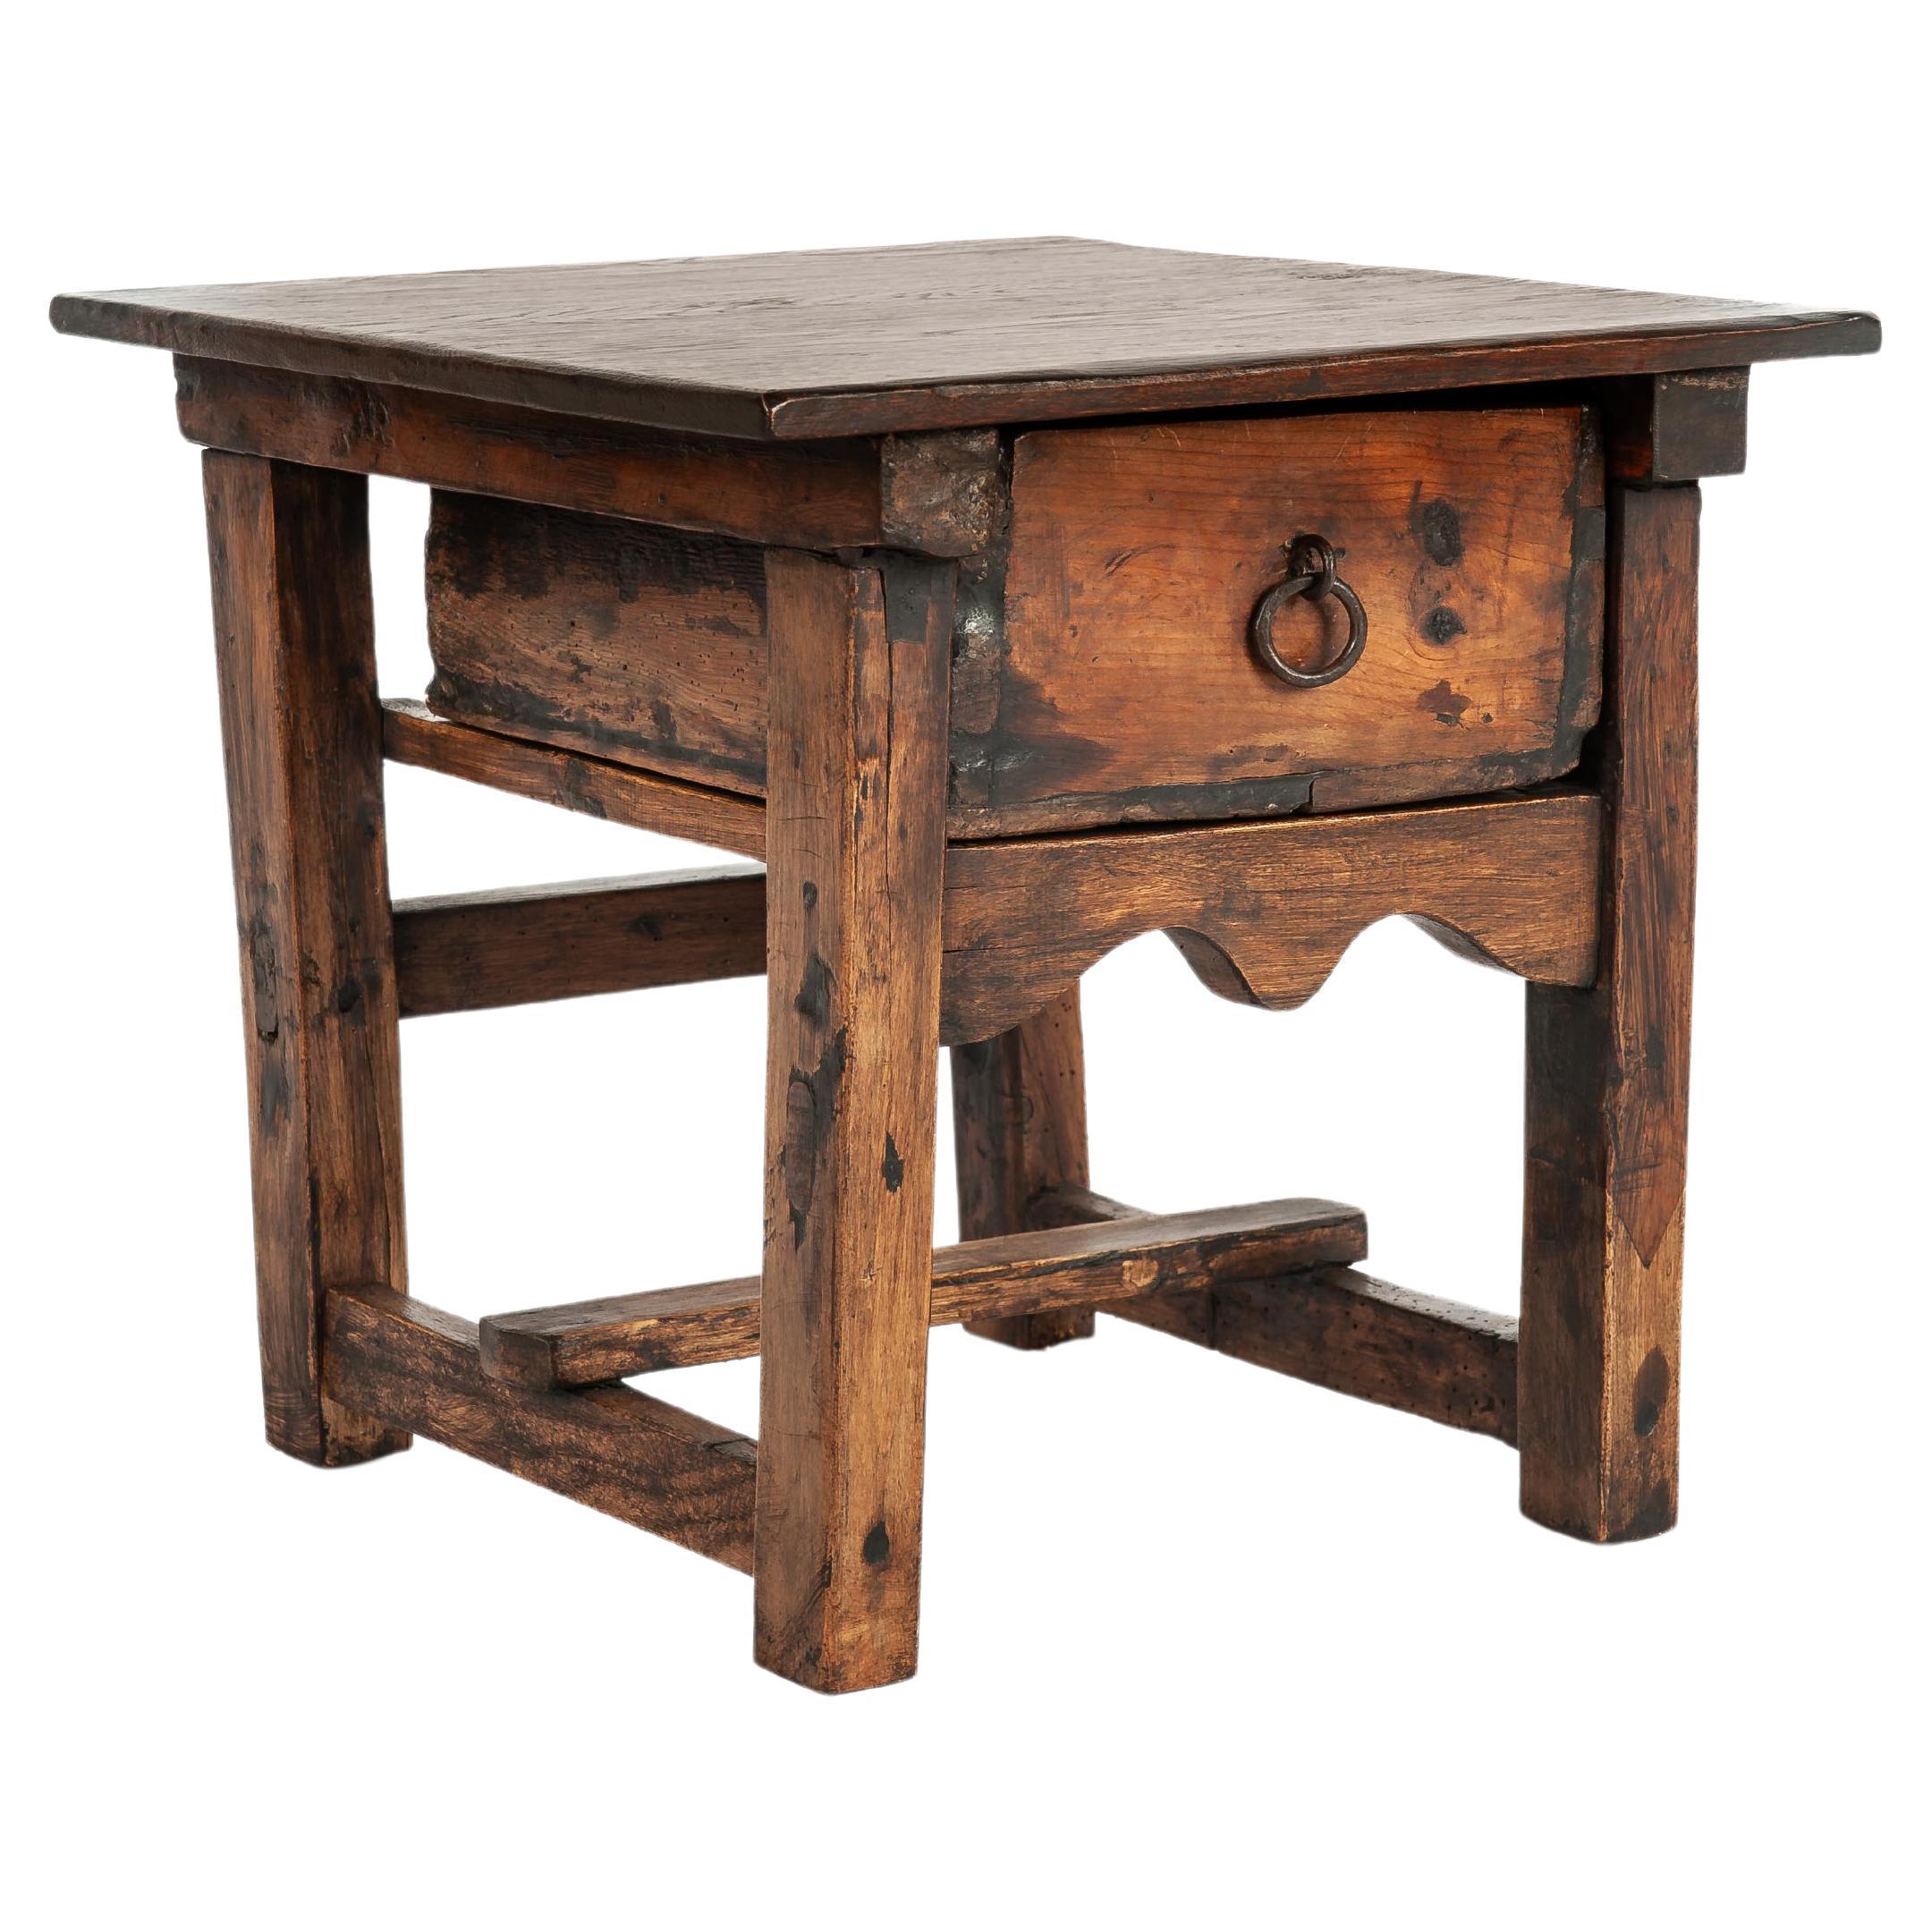 Antique early 19th century Spanish Provincial Chestnut side table or tavern tabl For Sale